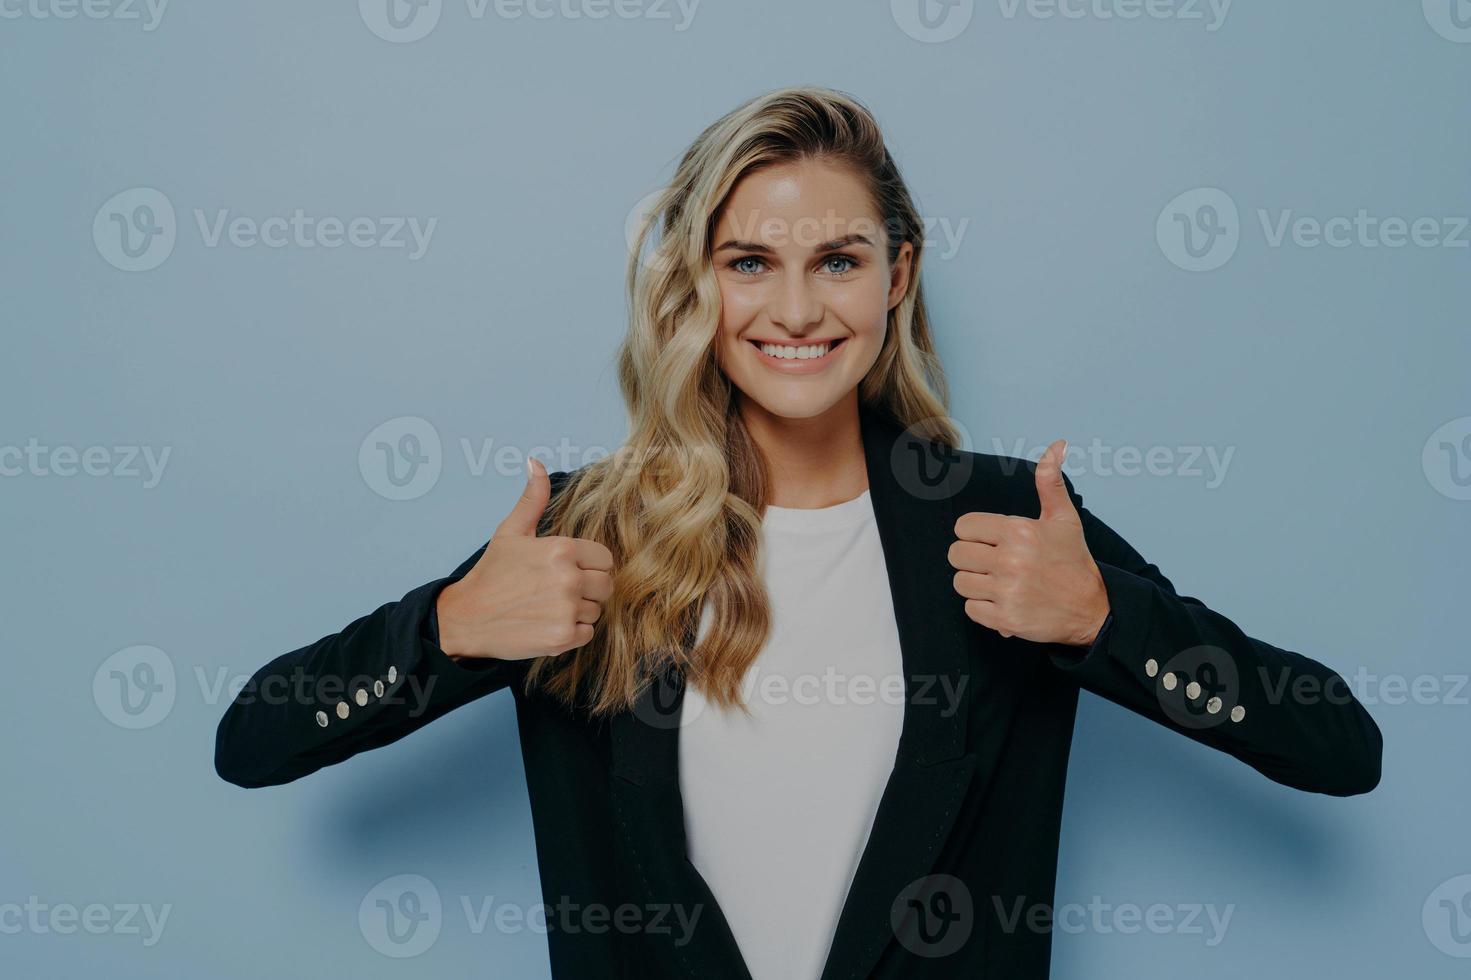 Cheerful girl with blonde hair looking at camera with satisfaction, smiling and showing thumbs up photo